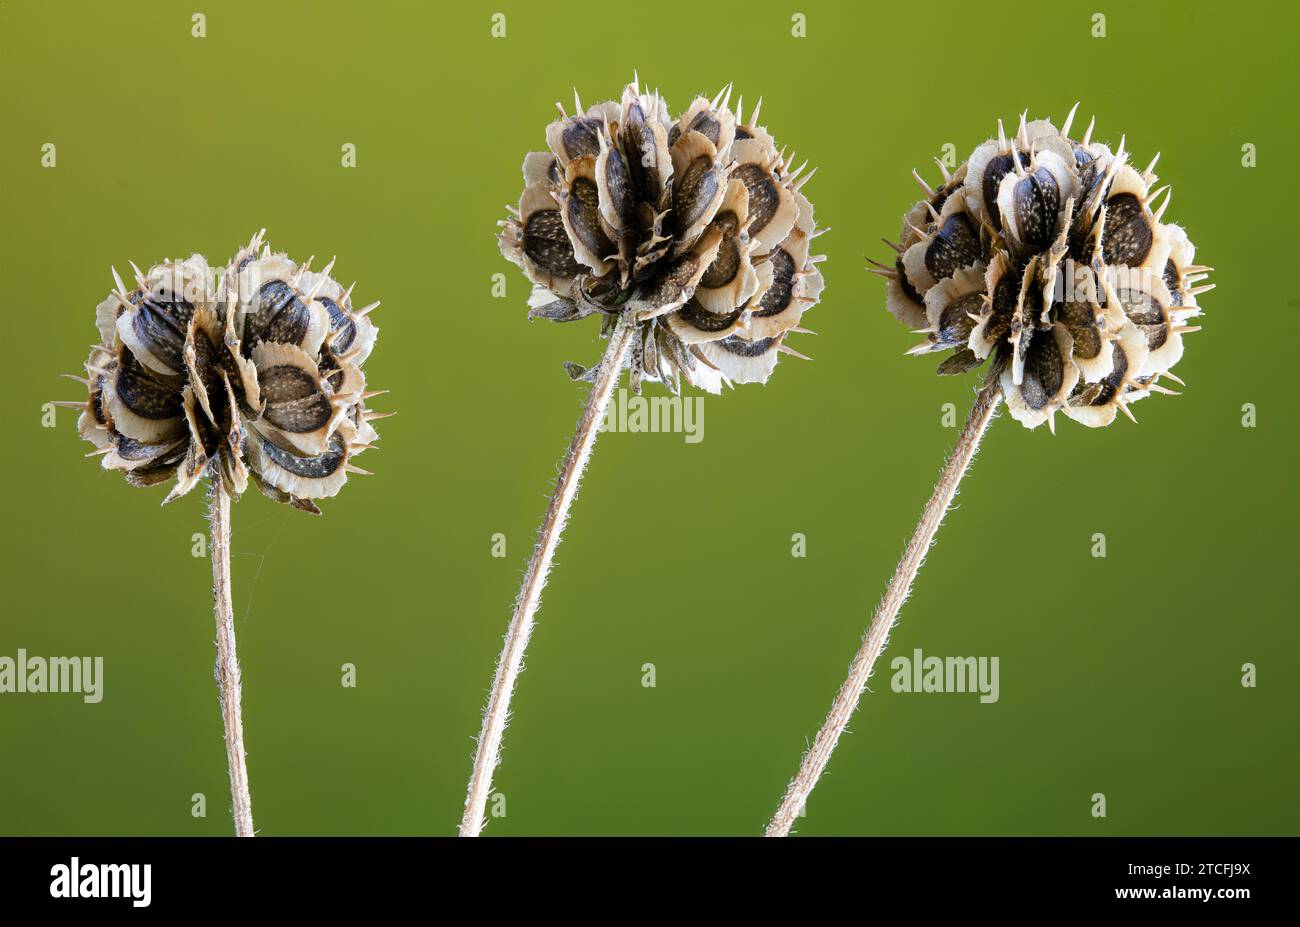 Seedheads of wingstem (Verbesina alternifolia) in autum in central Virginia. Wingstem is native to central and eastern North American fields and prair Stock Photo